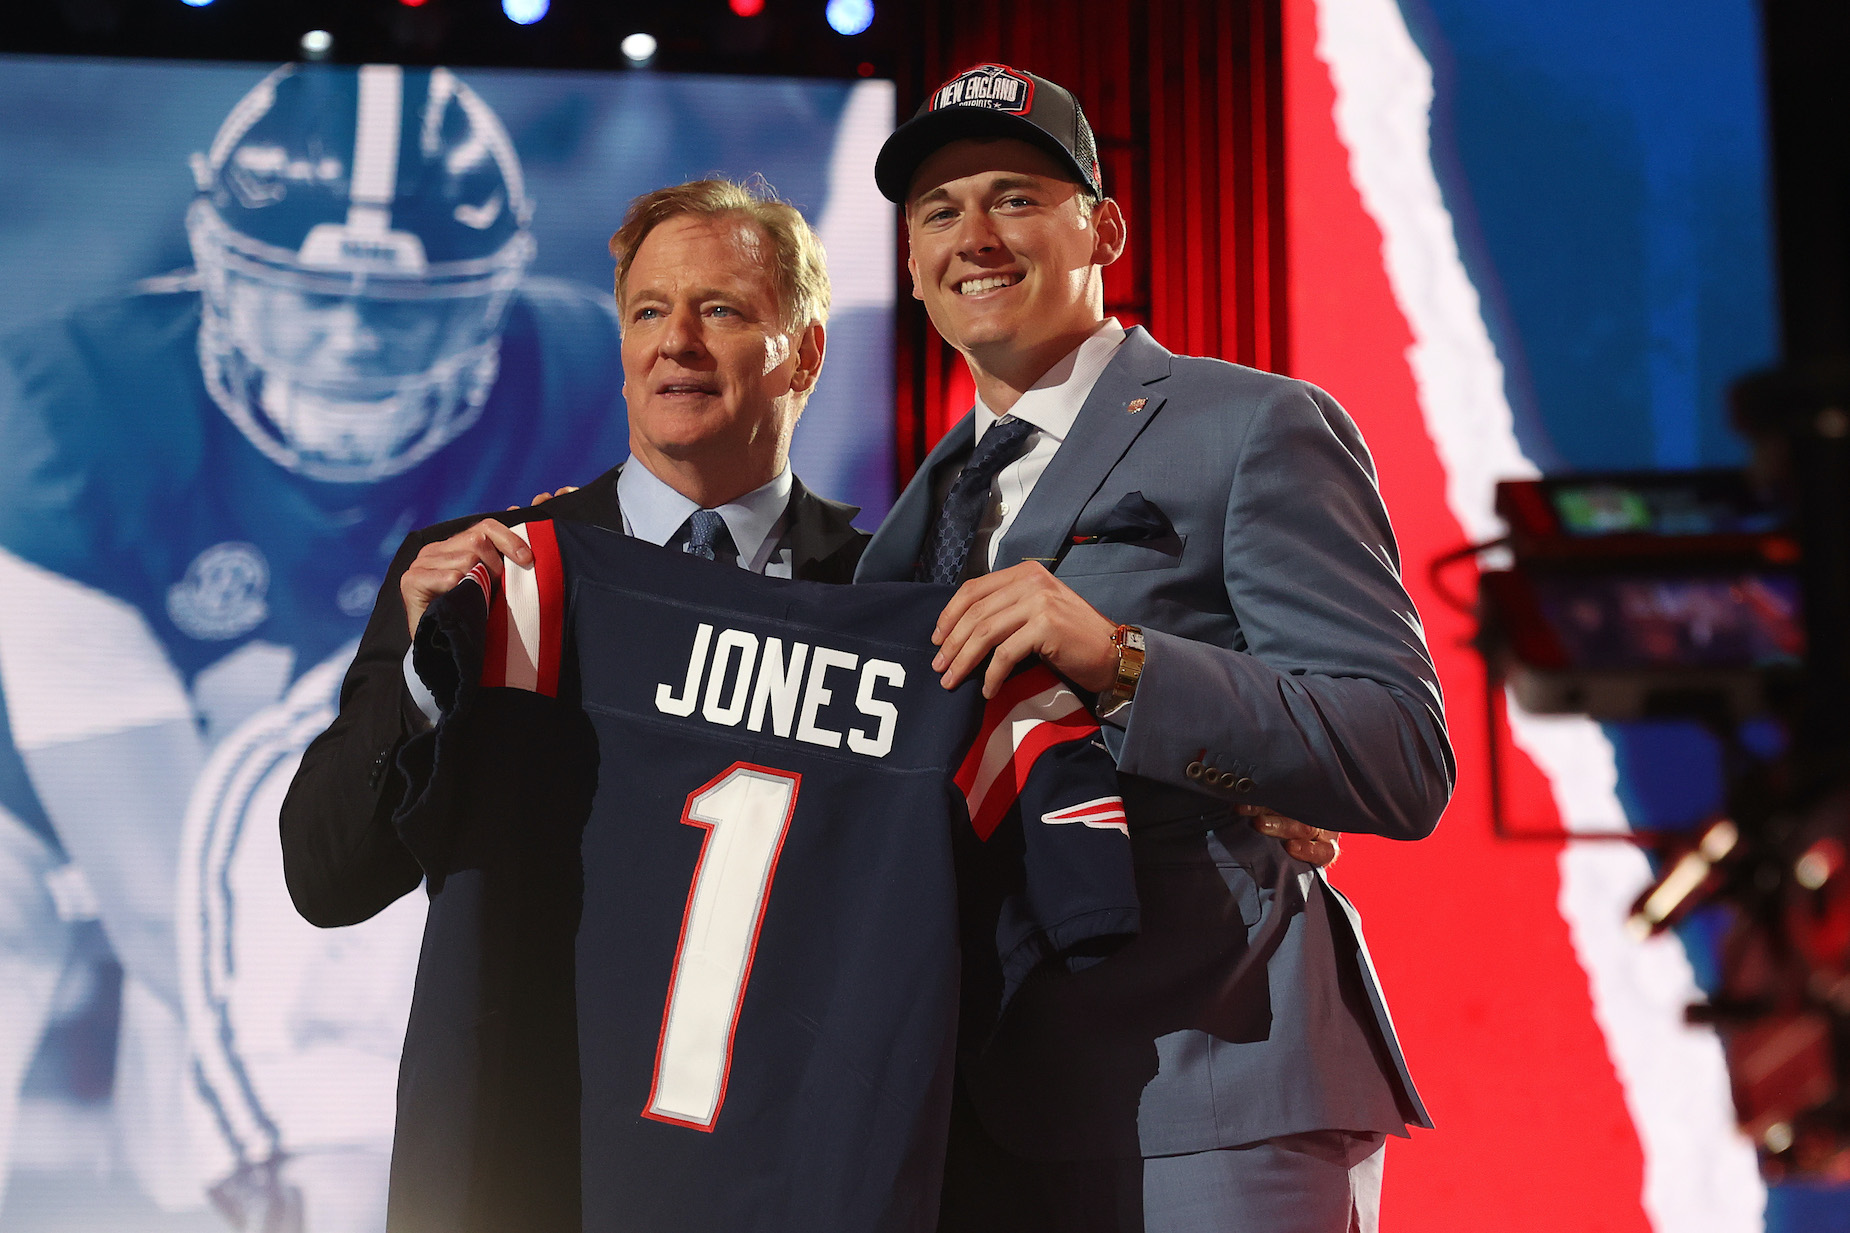 Mac Jones poses with Roger Goodell after being picked by the New England Patriots in the 2021 NFL draft.